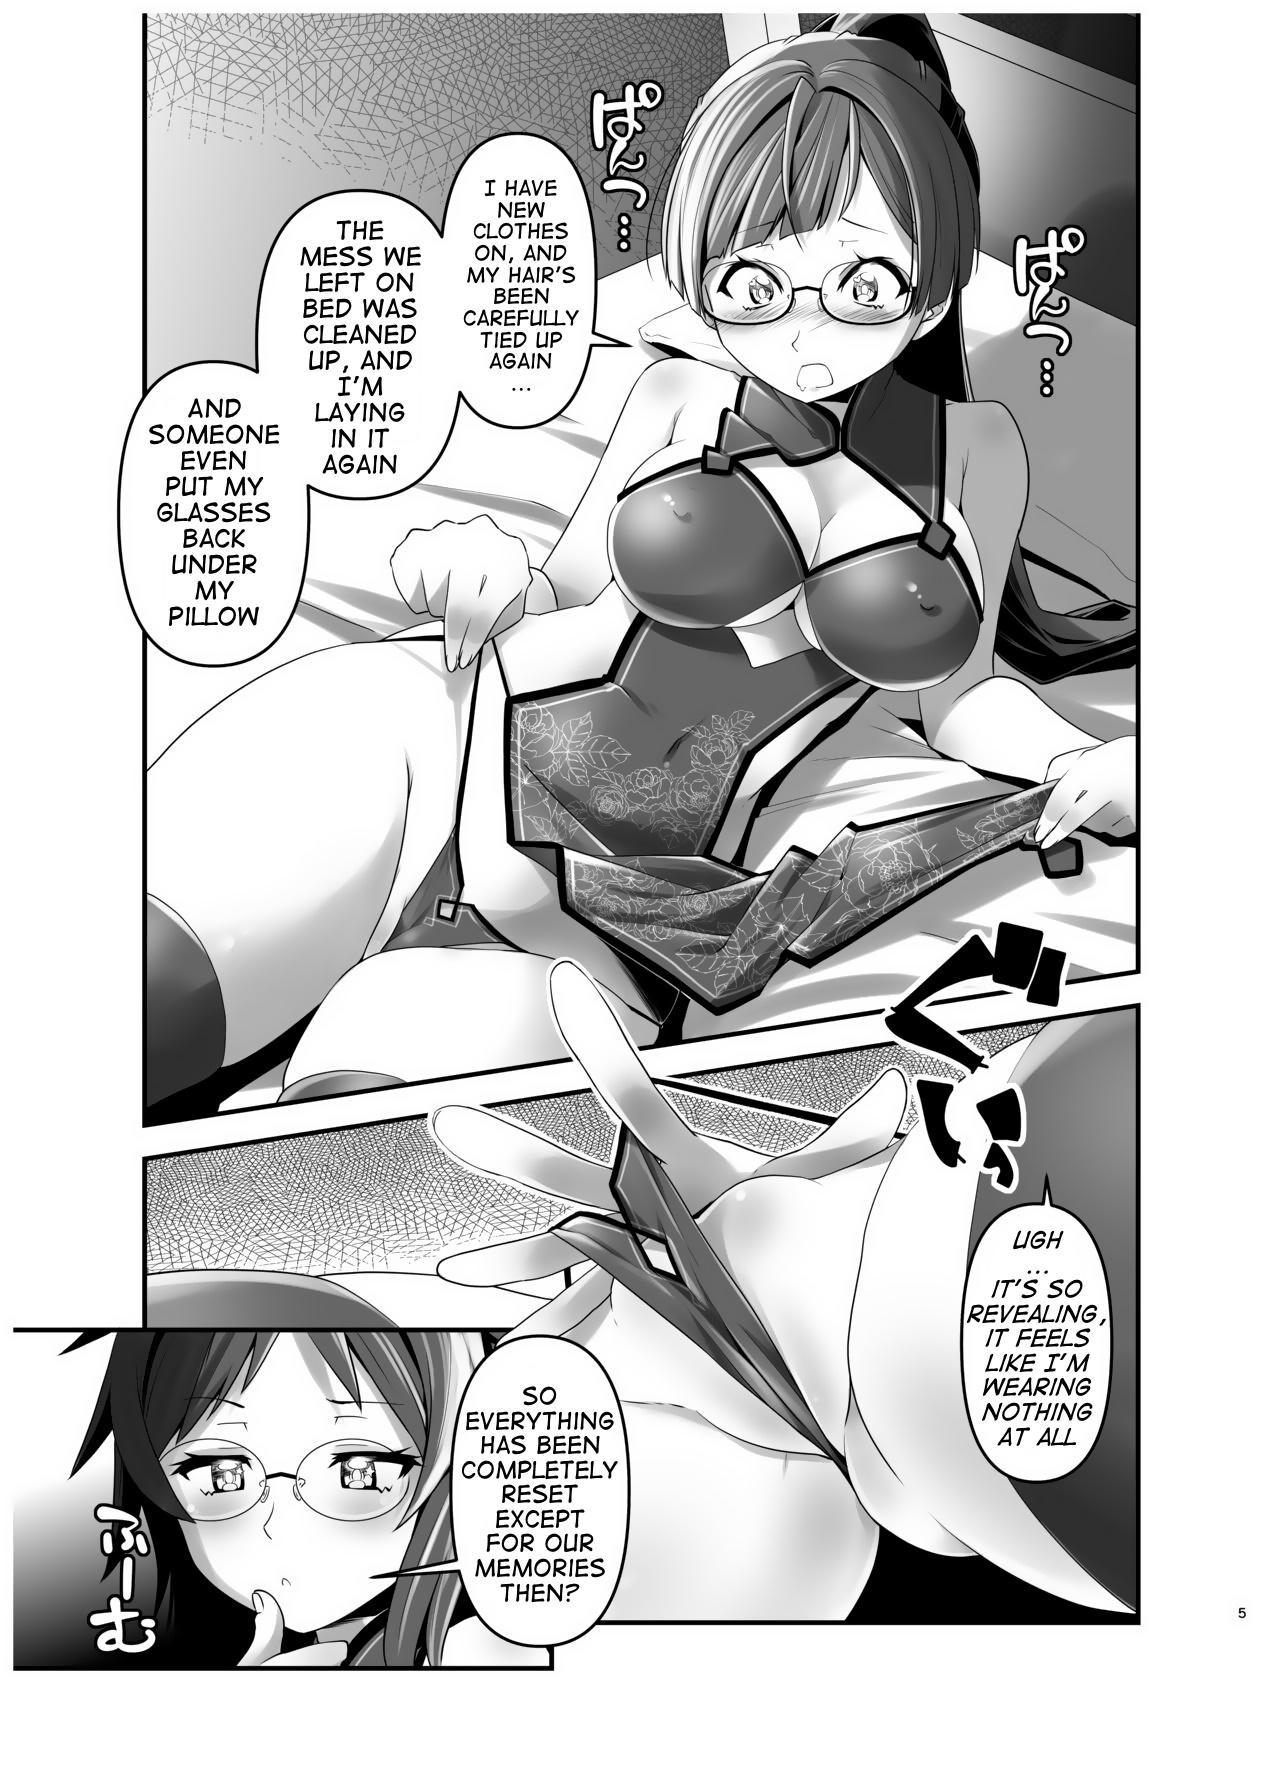 Hardcoresex Ore ga Bunretsu shite Isekai de TS suru Hanashi 4 | The Story of How I Split Up and TS In a Different World Ch 4 Gay Physicals - Page 4